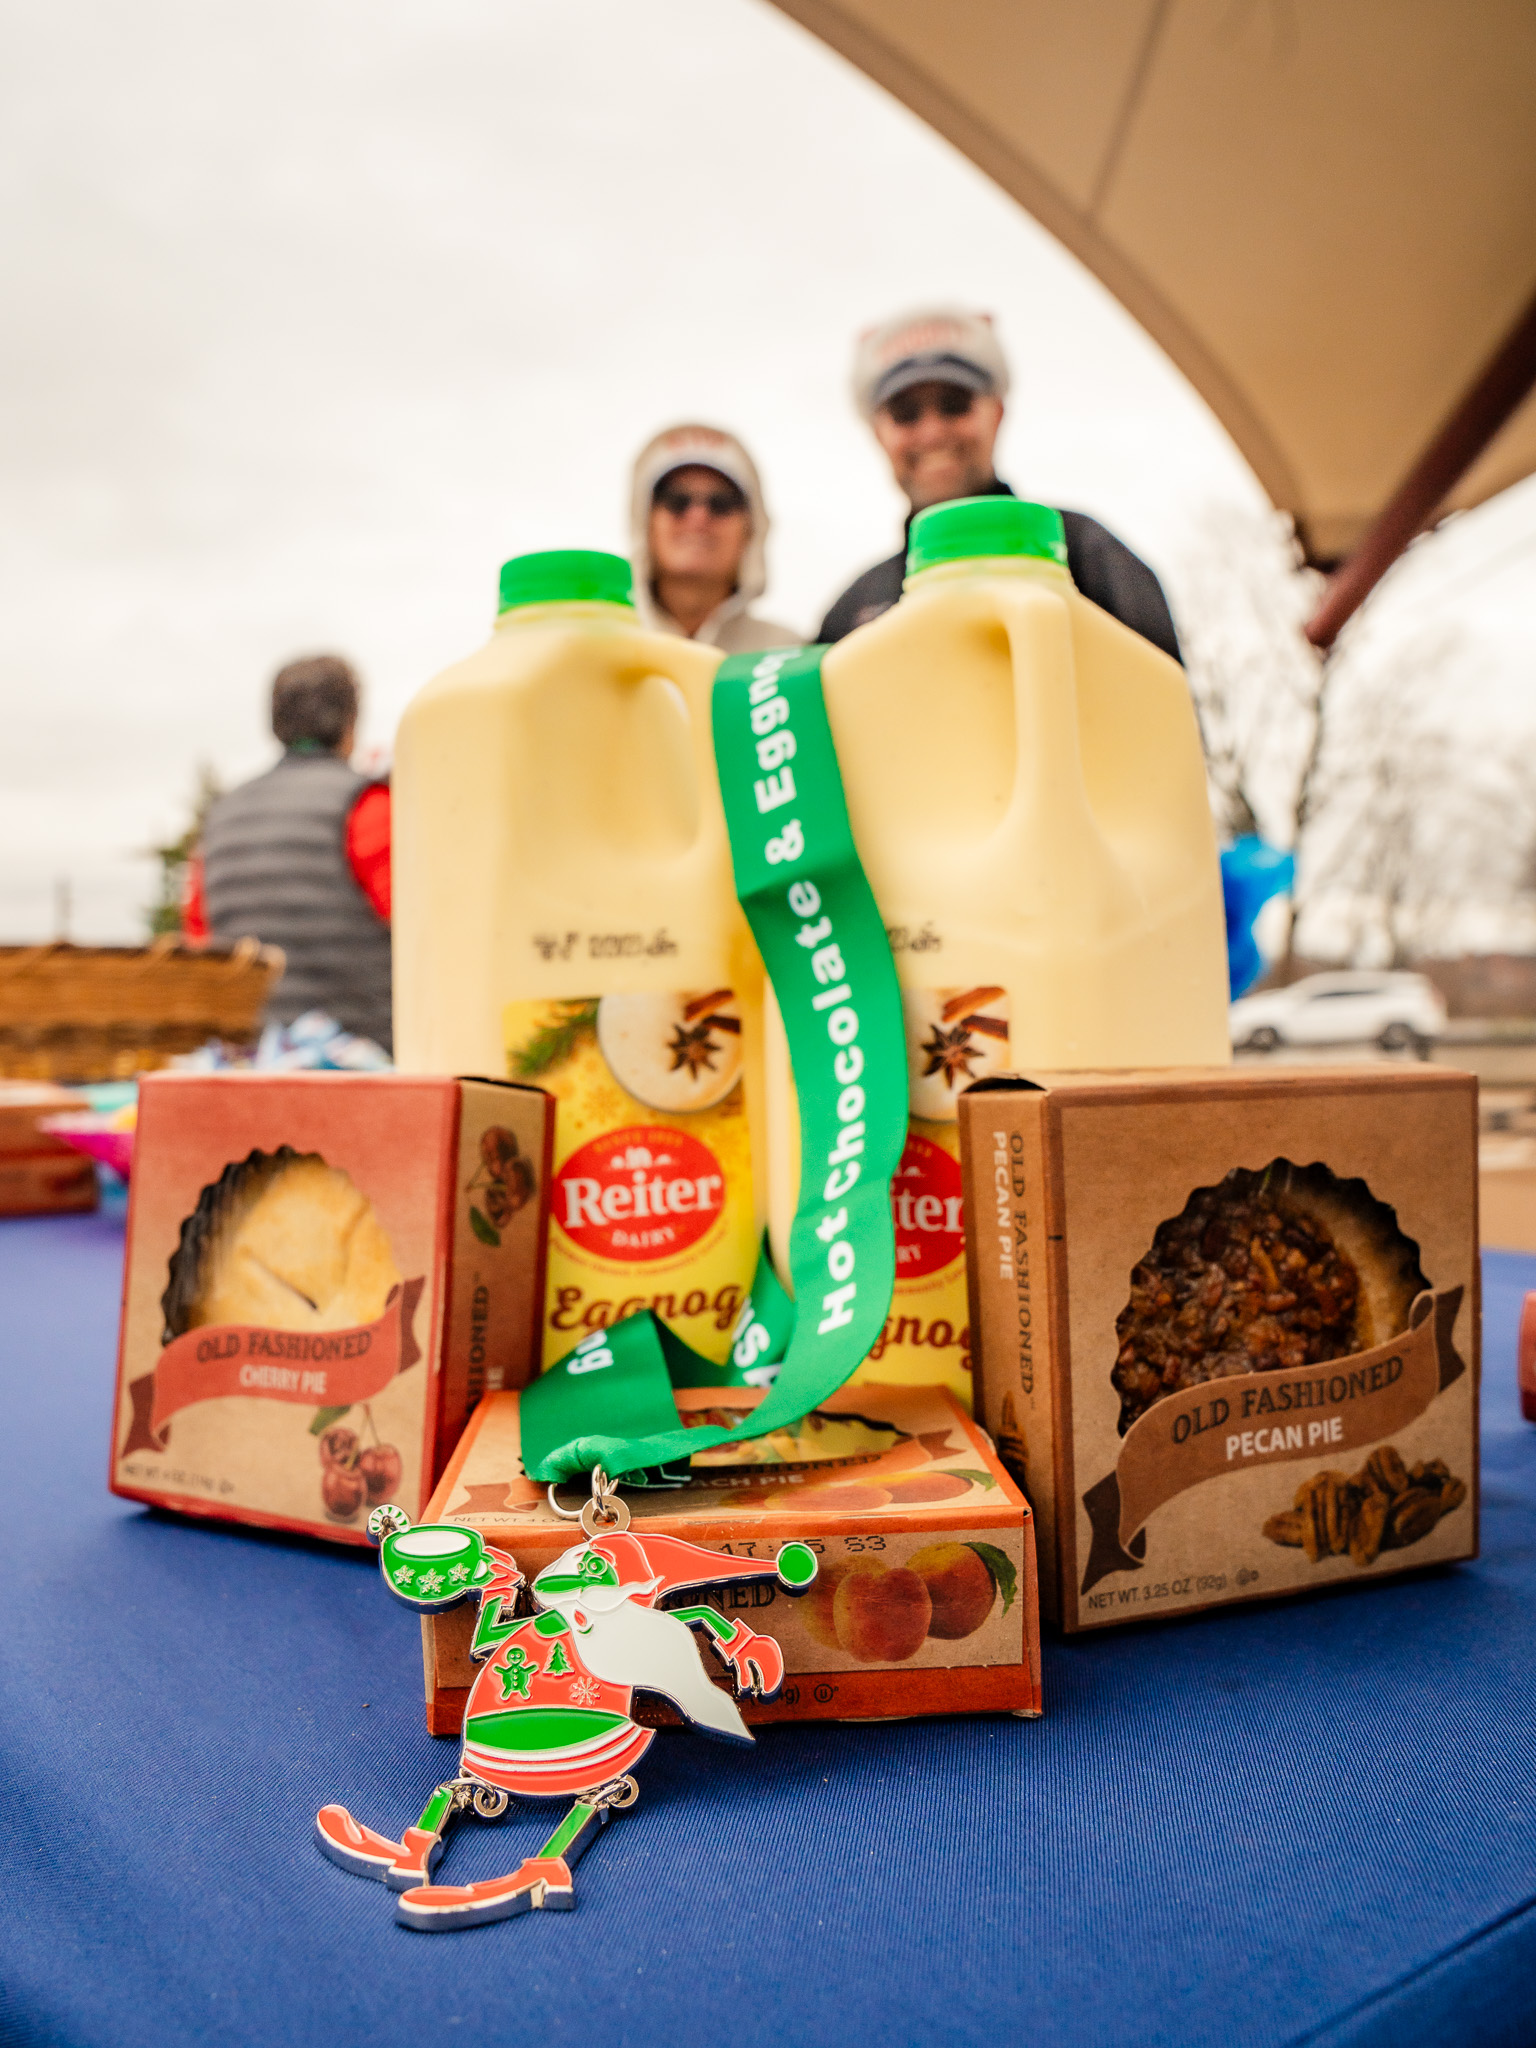 Hot Chocolate and Eggnog 1mi, 5k, 10k & Kids Dash - USA Race Timing and Event Management - Hot Chocolate 5k - Columbus Hot Chocolate Race - Amazing Swag - Great Finishers Medal - Mini Pies